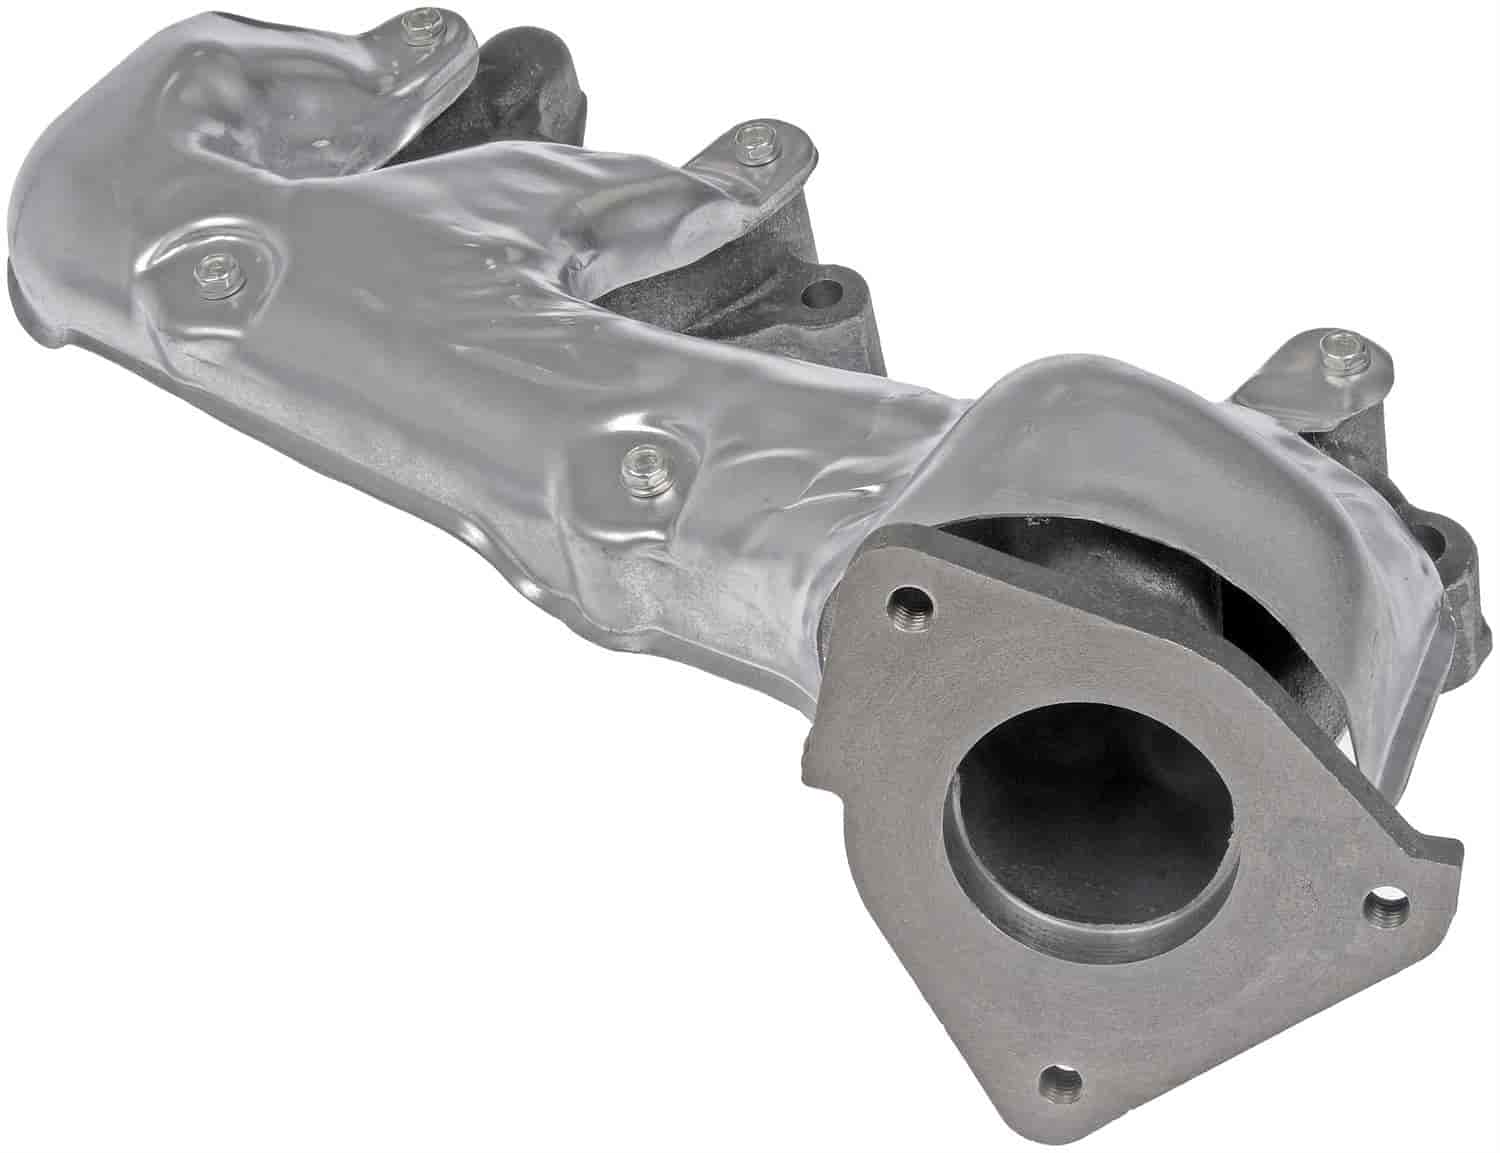 Exhaust Manifold Kit - Includes Require Gaskets And Hardware